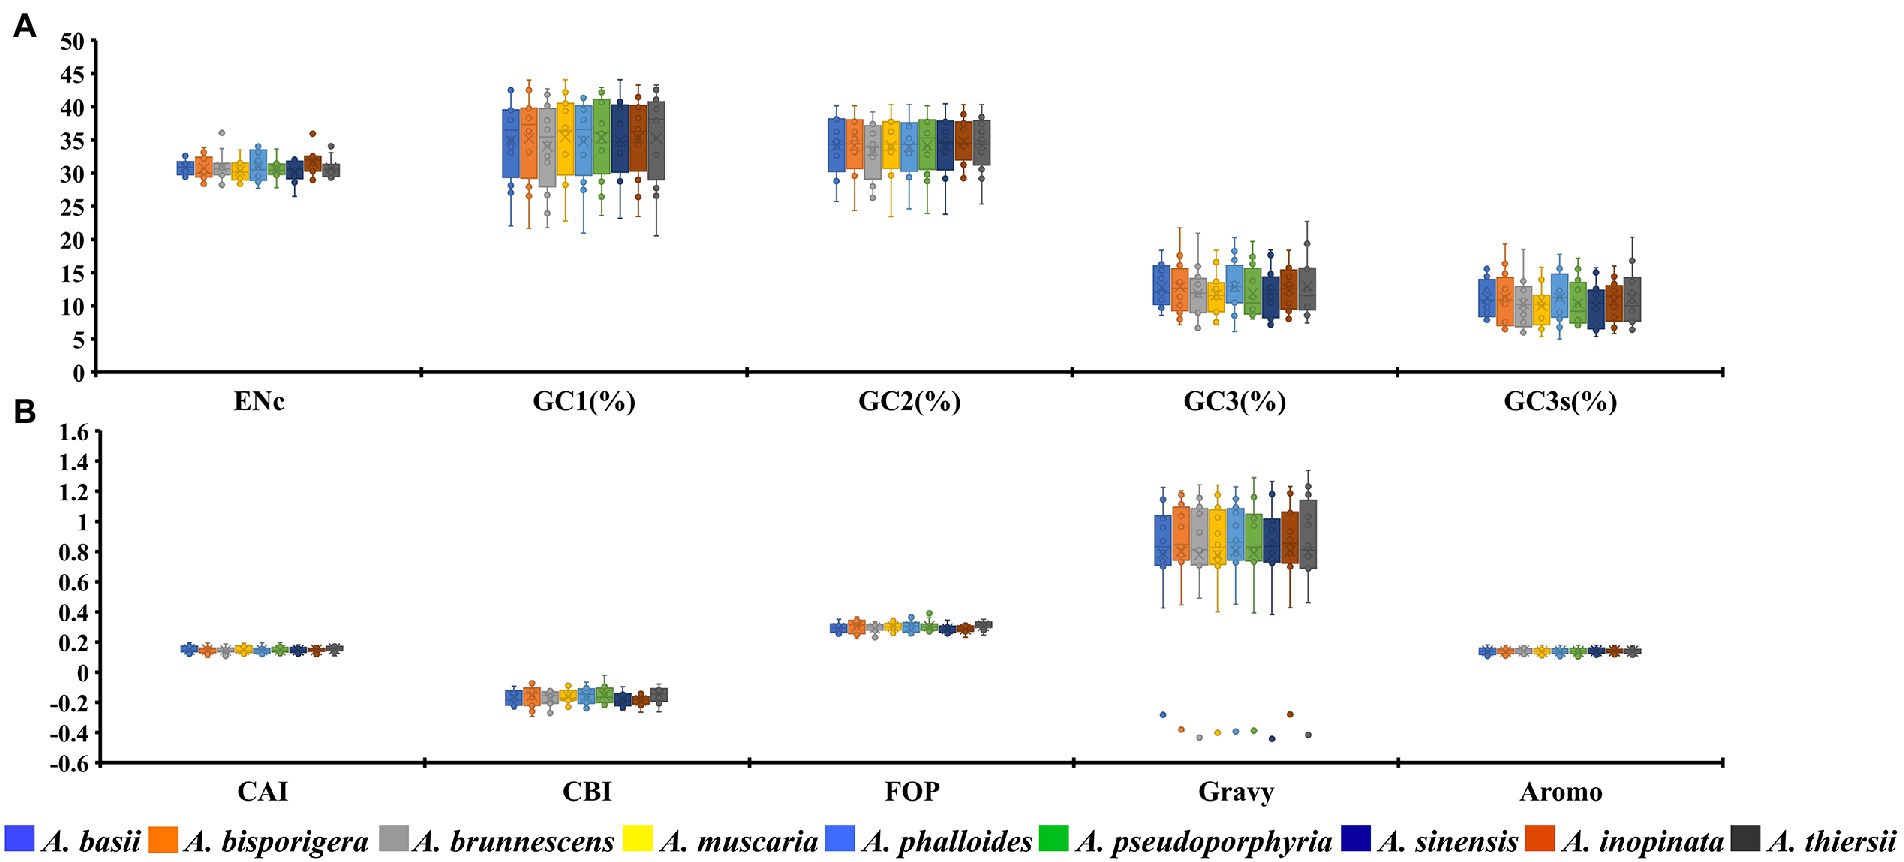 Mitogenome-wise codon usage pattern from comparative analysis of